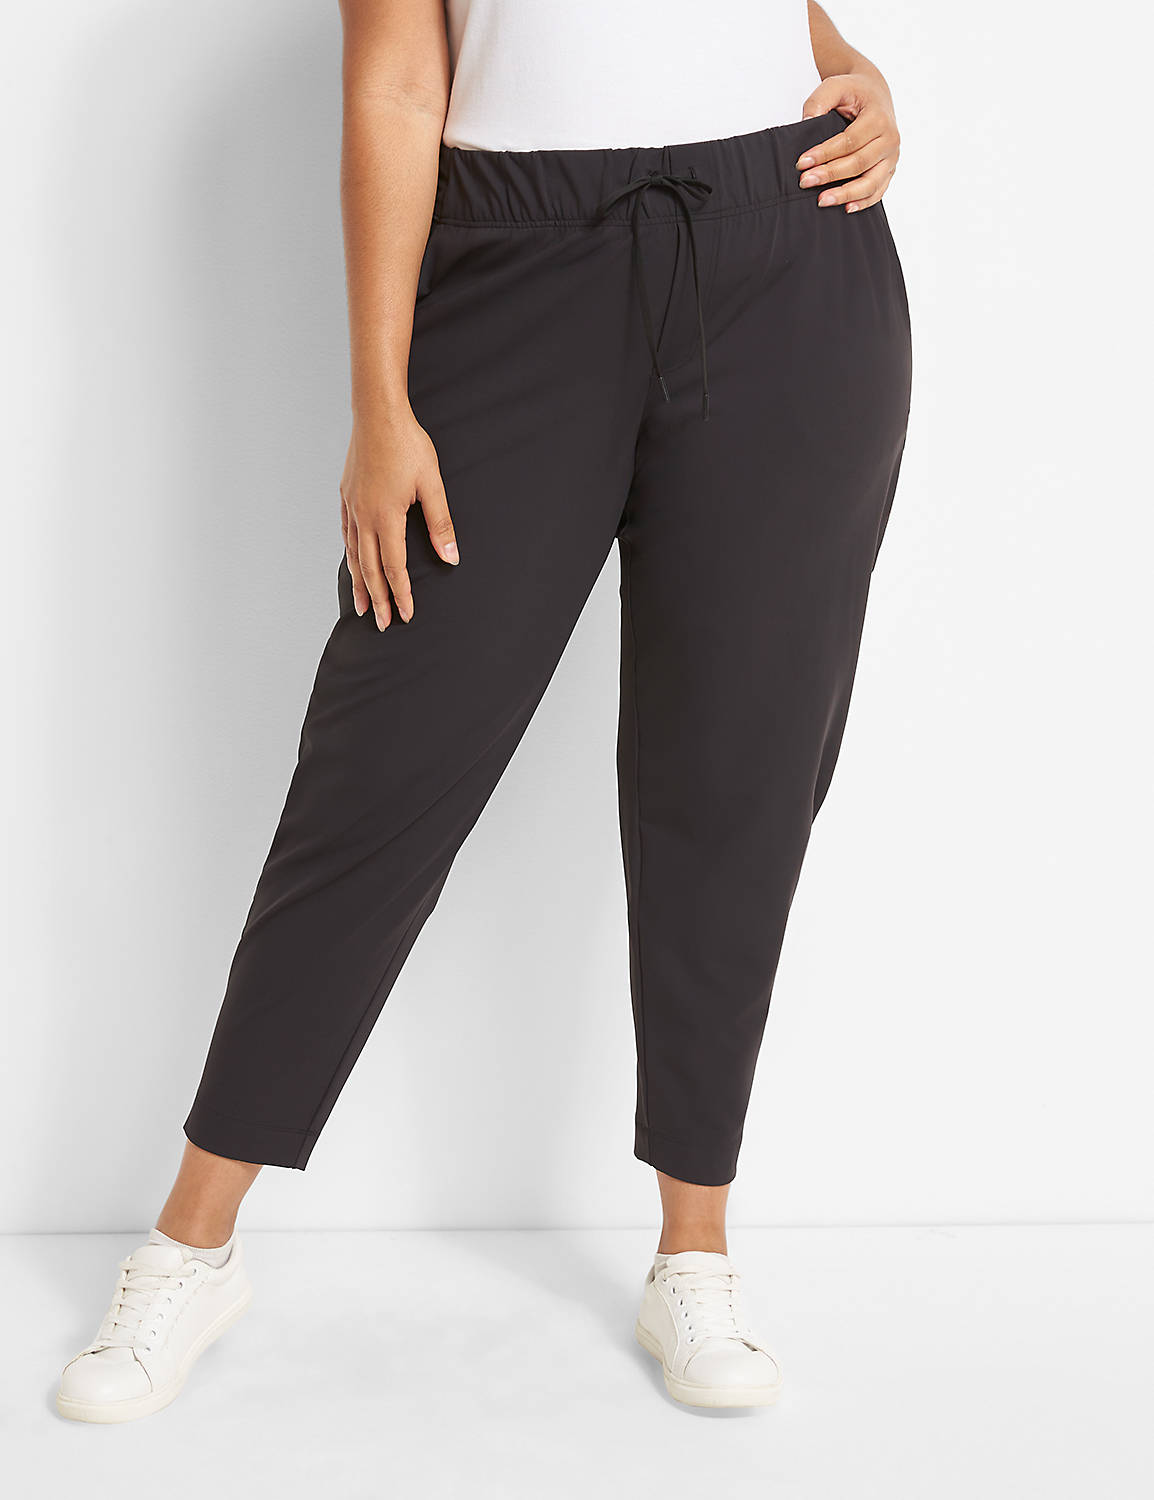 1105749 F Knit Stretch Trouser:Pitch Black LB 1000322:14/16 Product Image 1